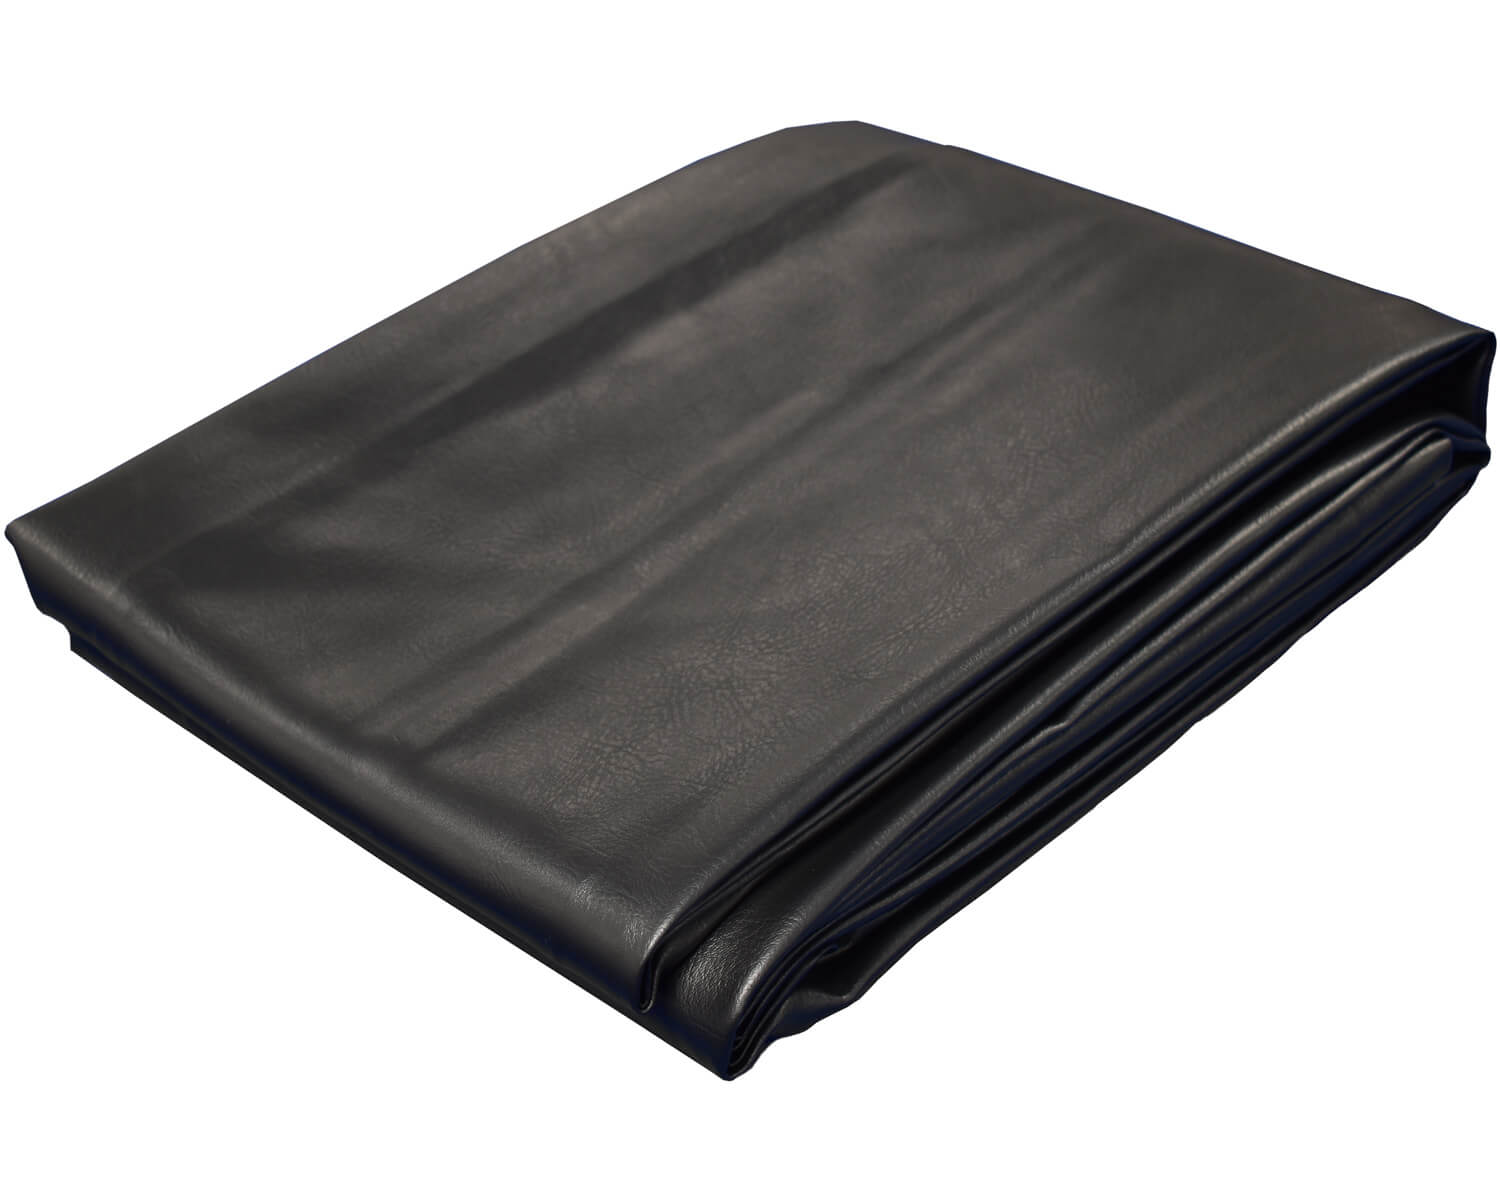 Pureline Black Leather Pool Table Cover Liberty Games